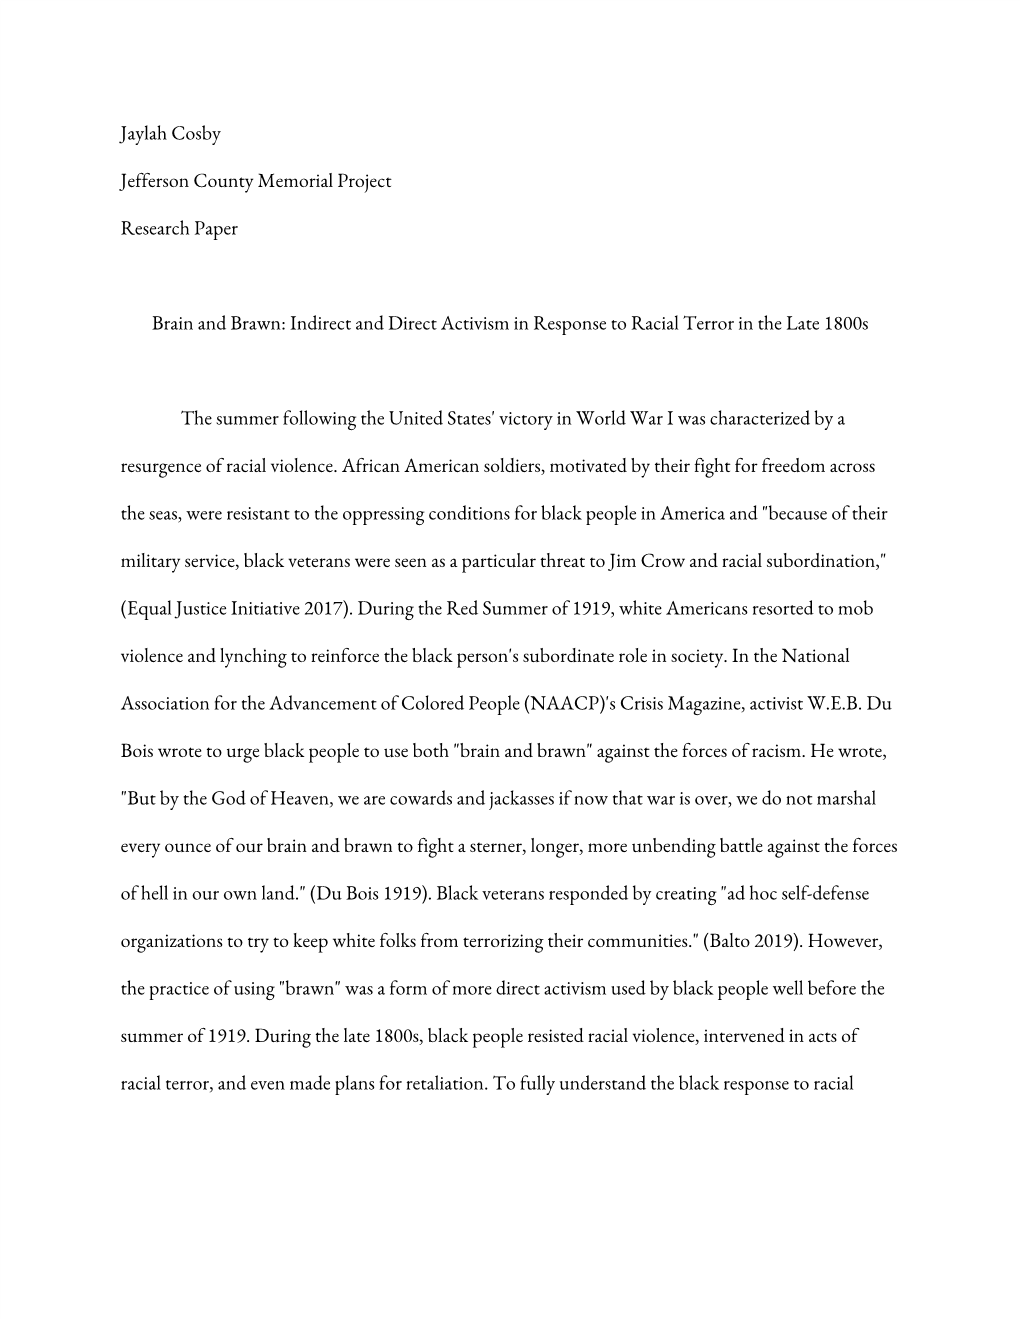 Jaylah Cosby Jefferson County Memorial Project Research Paper